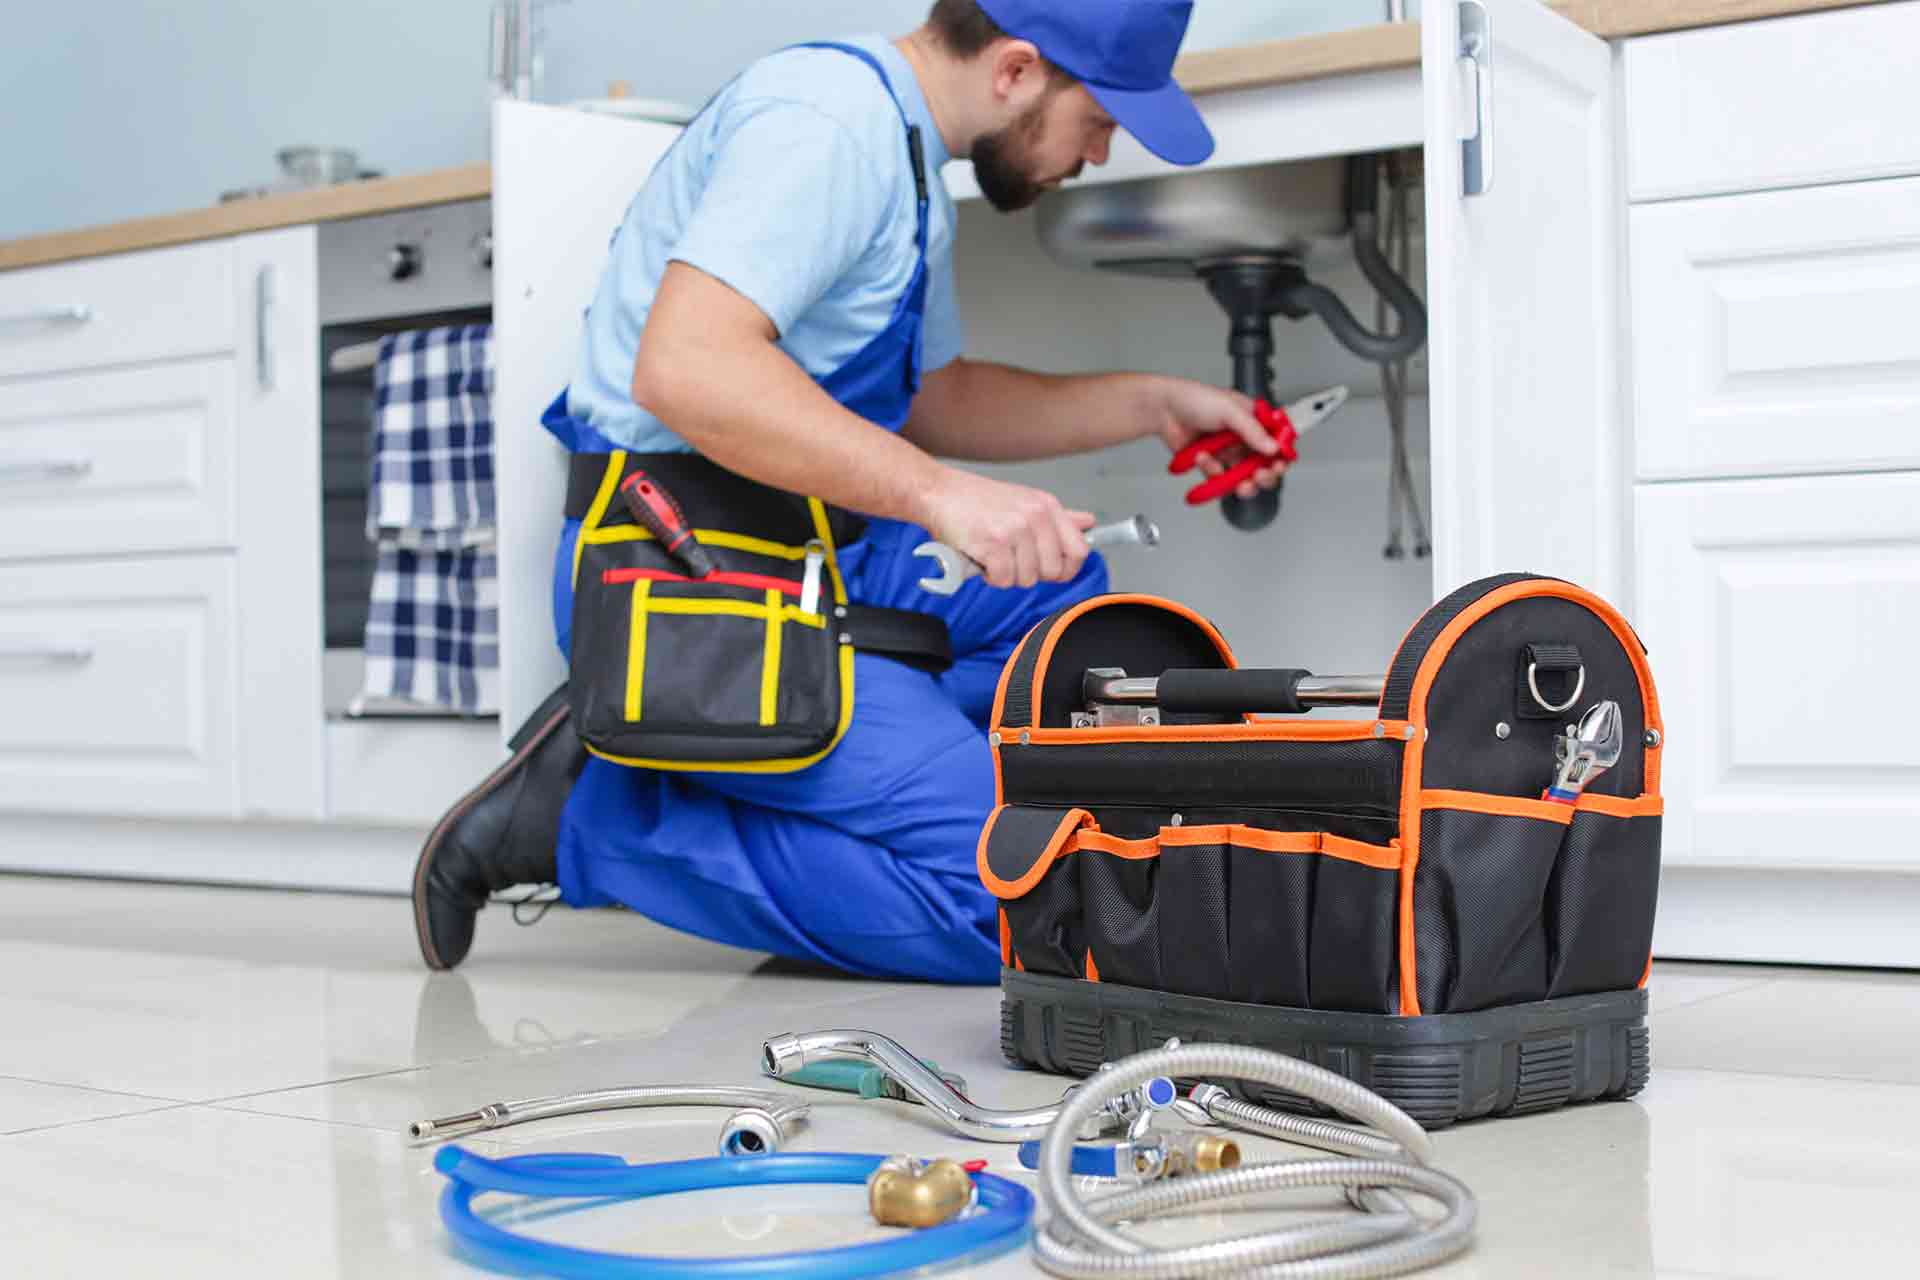 Finding Reliable Plumbers Near You: Tips and Considerations